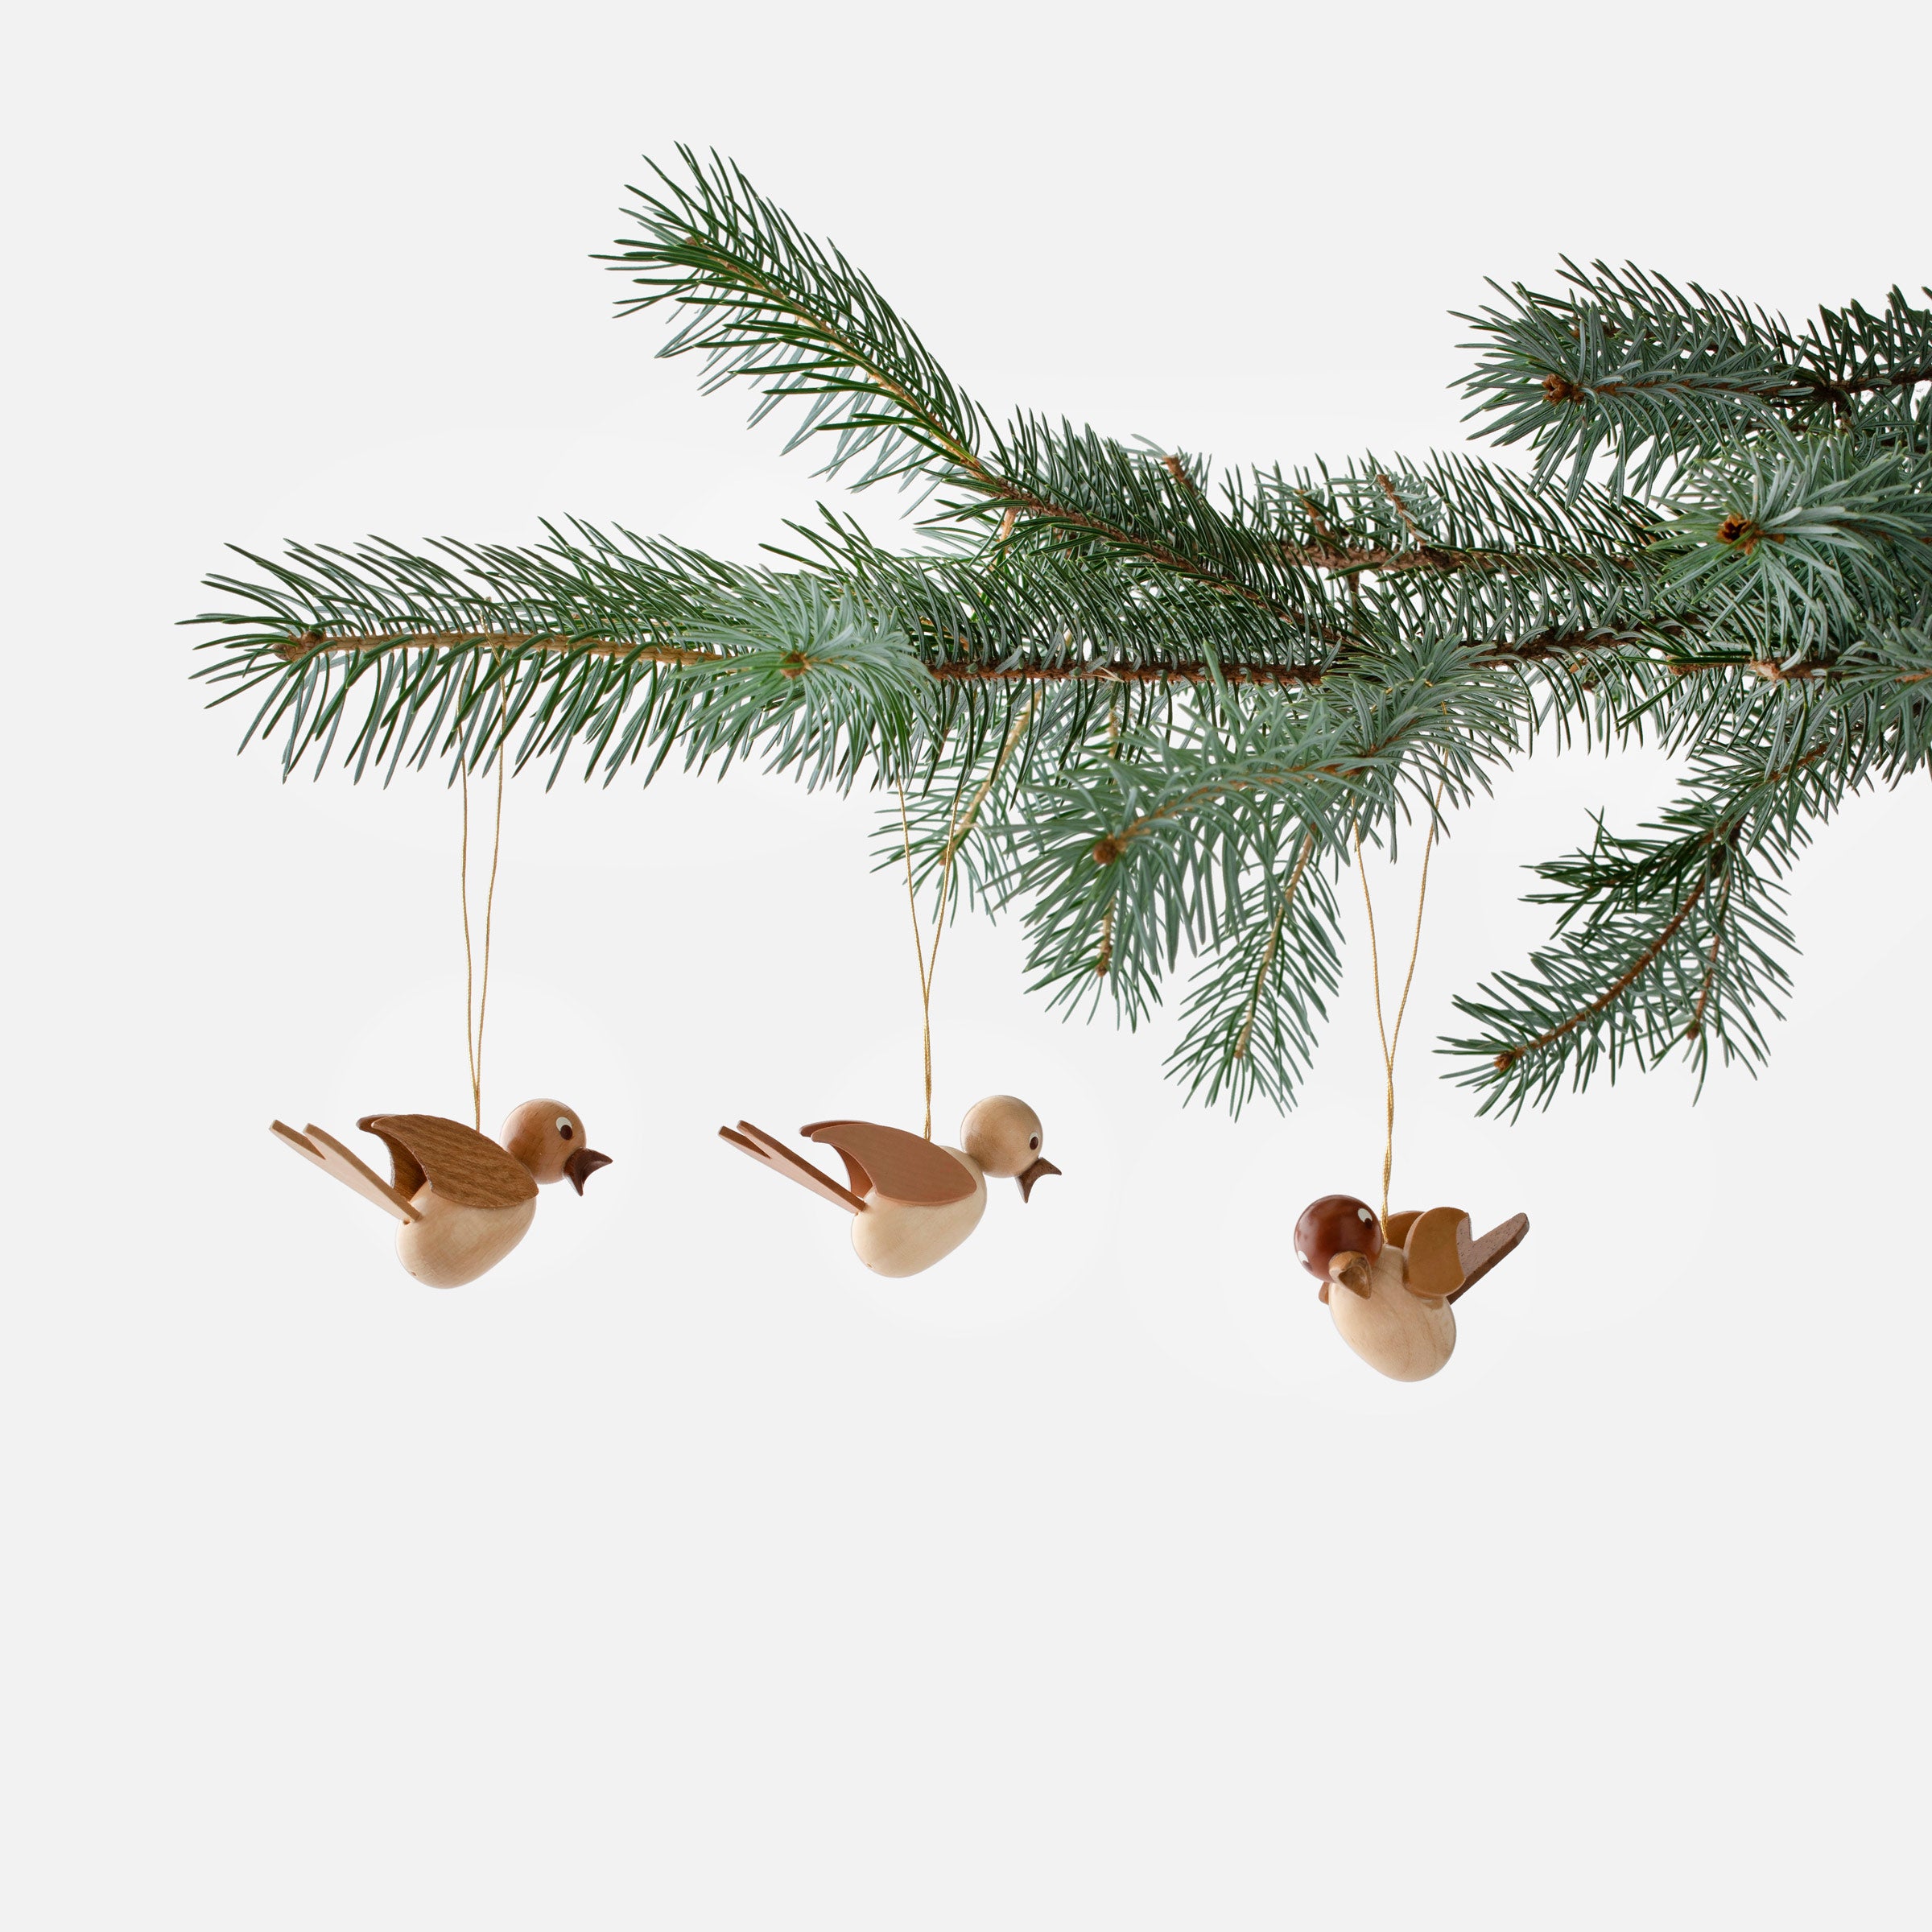 Wooden songbird ornament set hanging on a tree. 